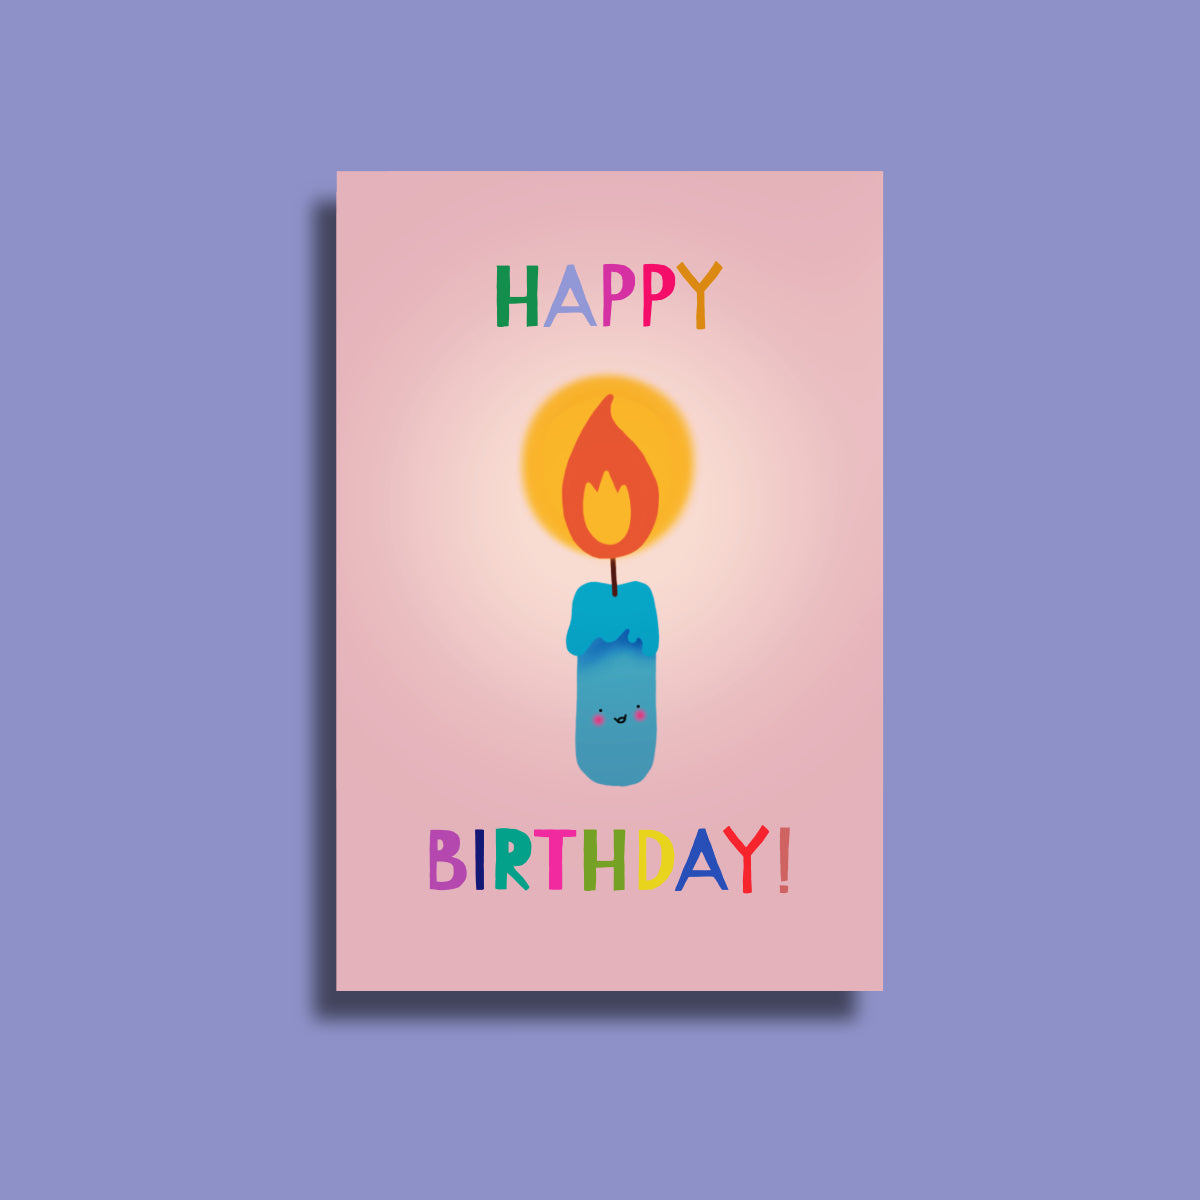 Bright candle postcard